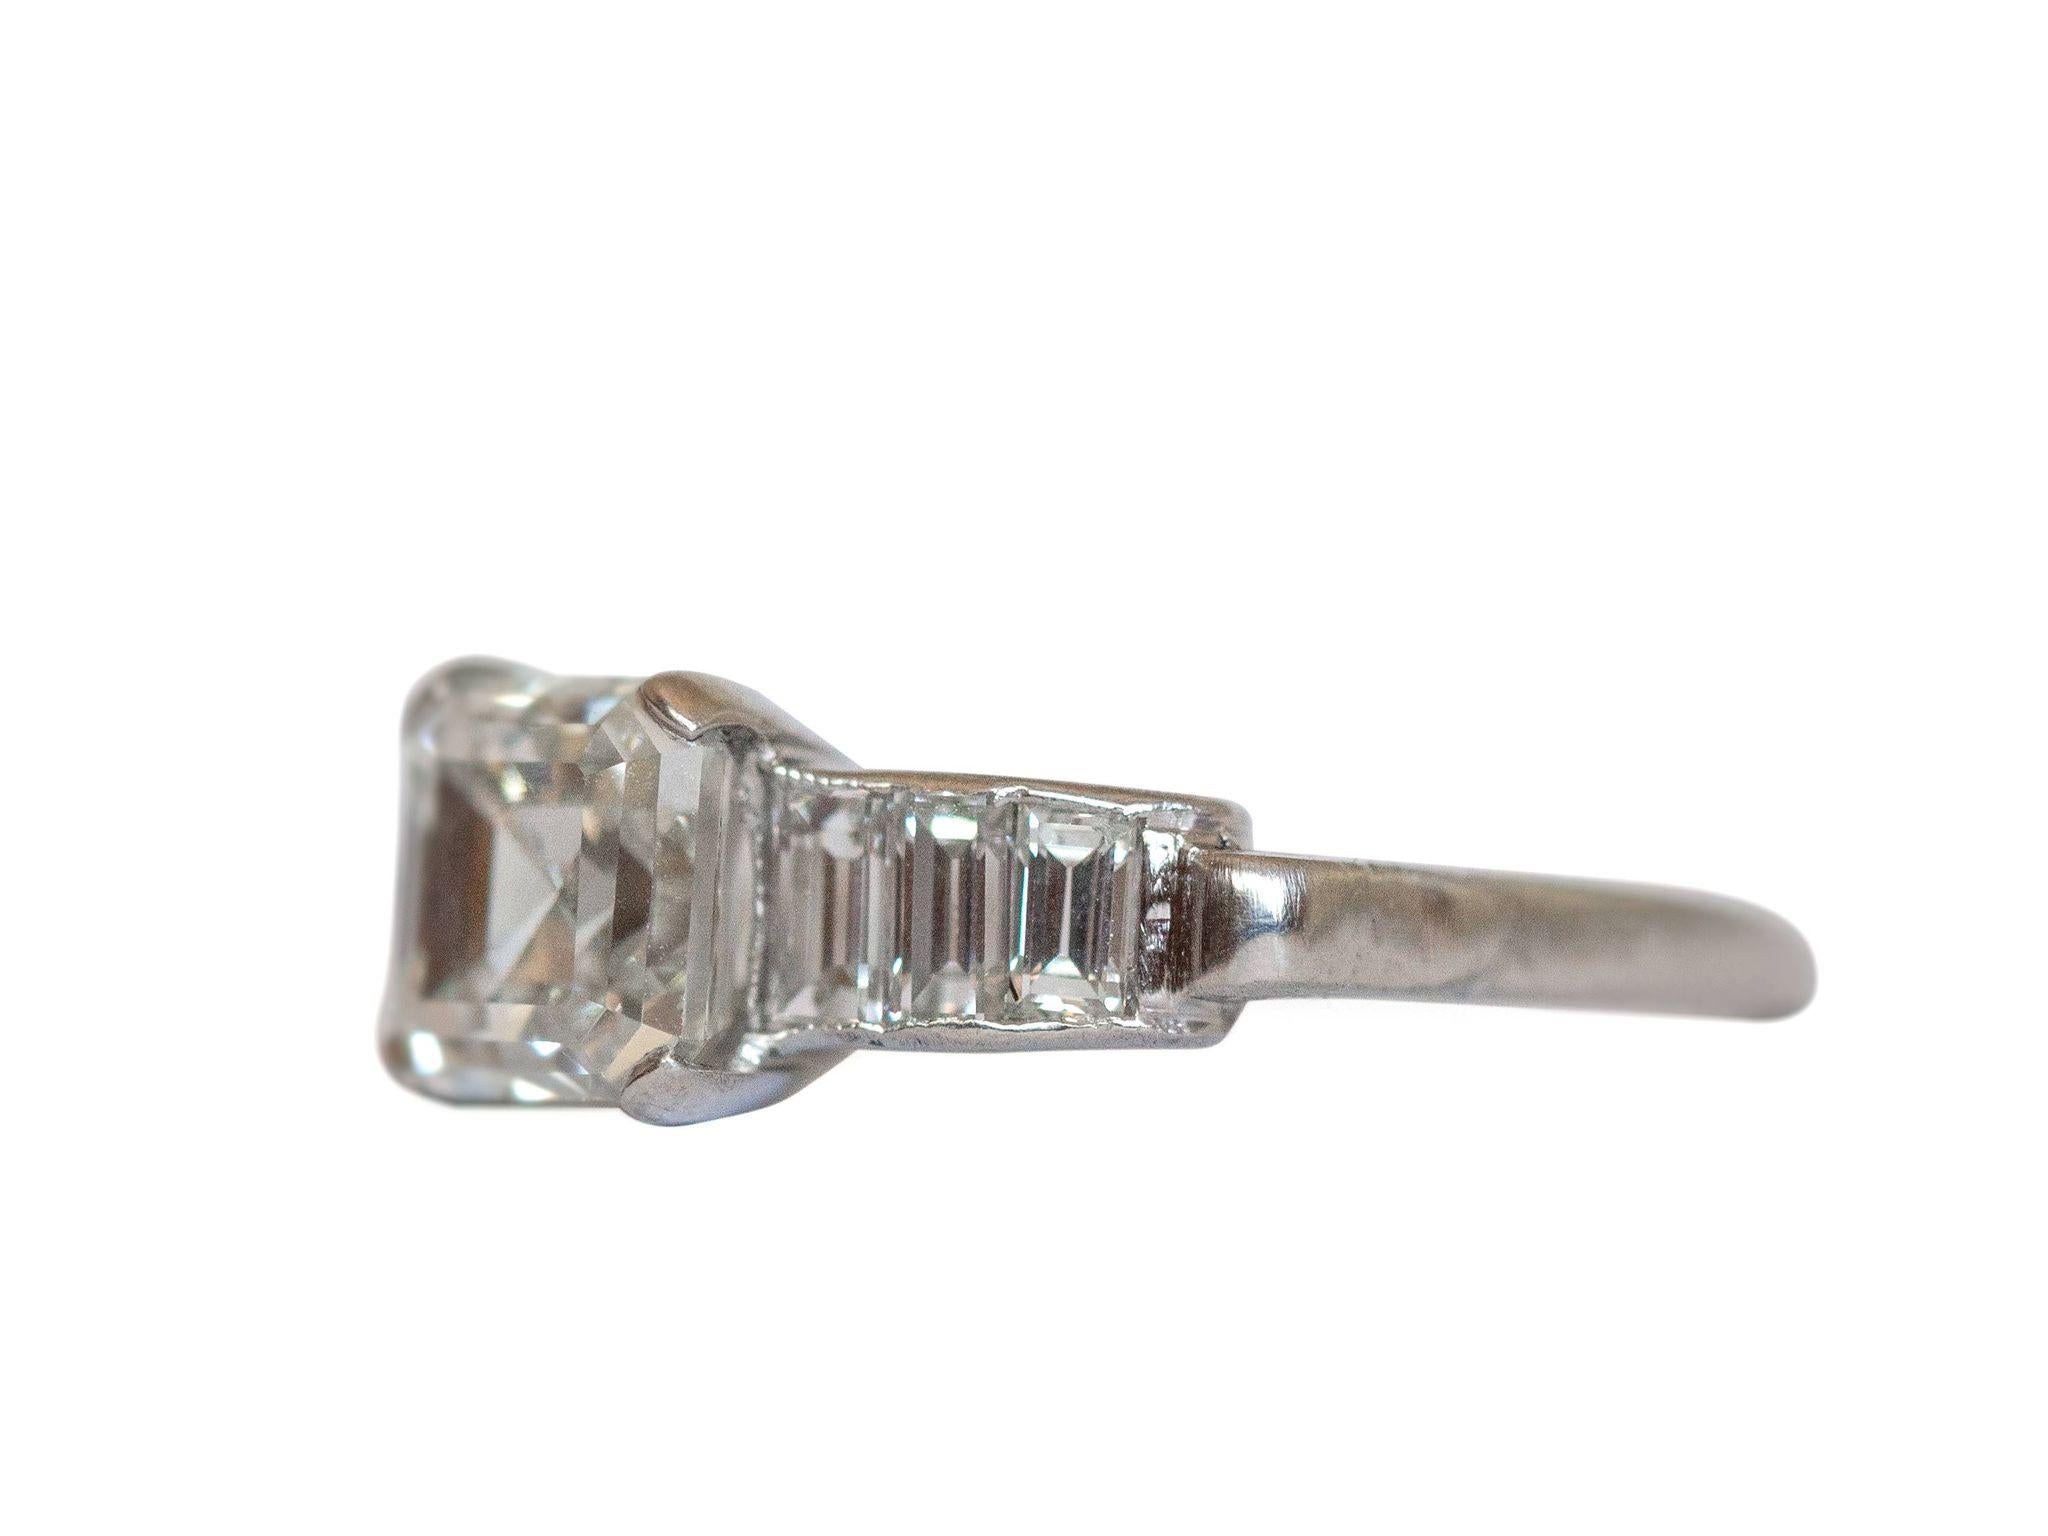 This classic diamond engagement ring features a 1.51 carat GIA Asscher cut diamond set in the center. The stunning center is held in a classic platinum ring with tapering baguette cut diamonds that sparkle from shoulder to shoulder! This simple yet